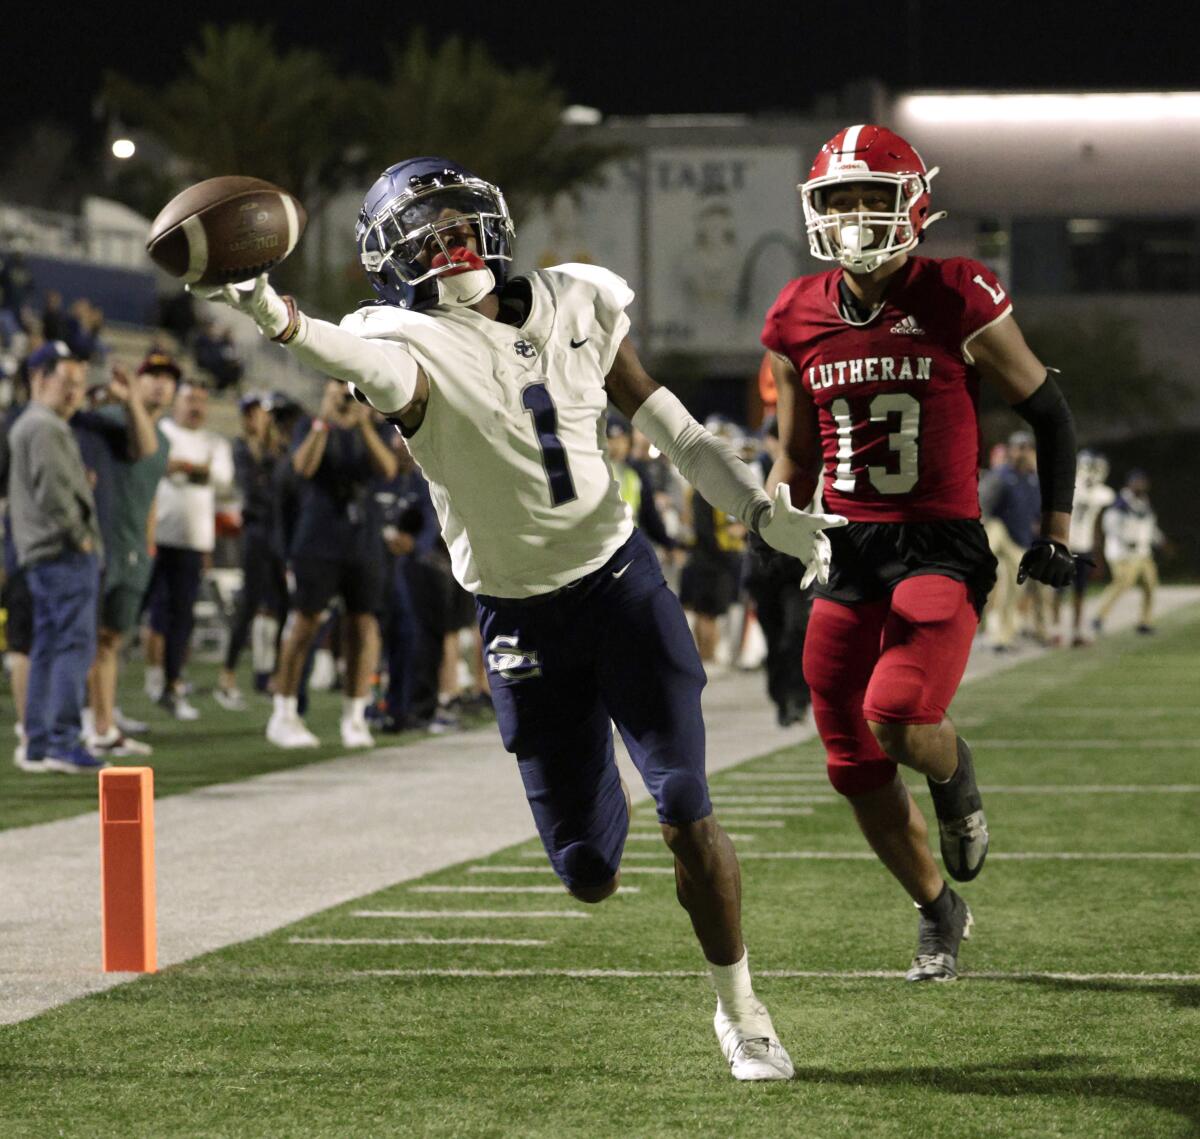 Sierra Canyon wide receiver Jae'on Young can't quite get to a pass in the end zone Friday during a win over Orange Lutheran.